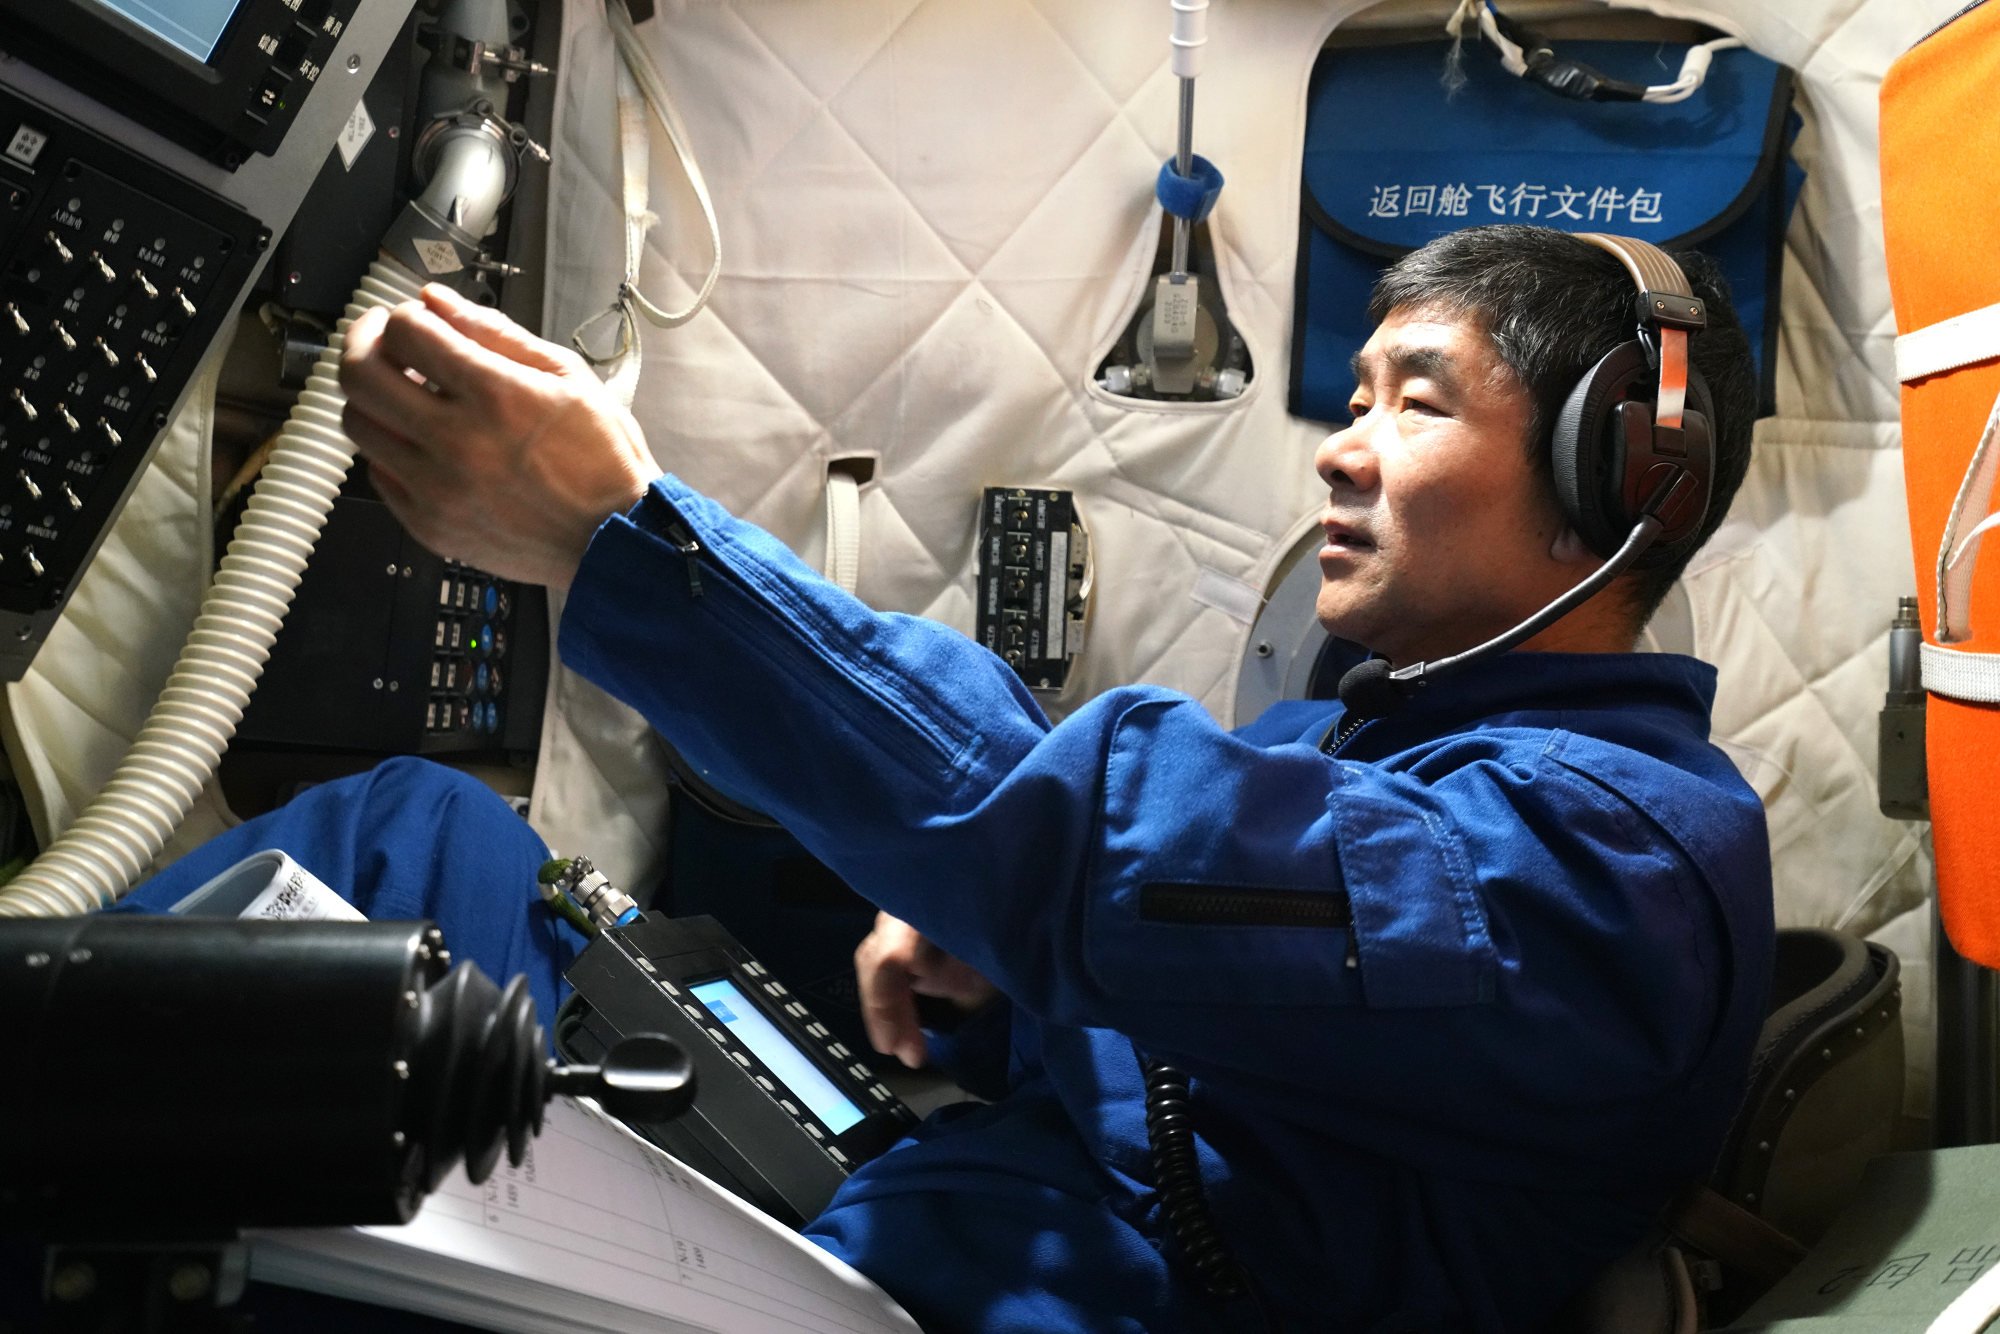 hong kong awaits day it will contribute payload specialist to chinese space missions, city’s john lee says ahead of astronauts’ arrival